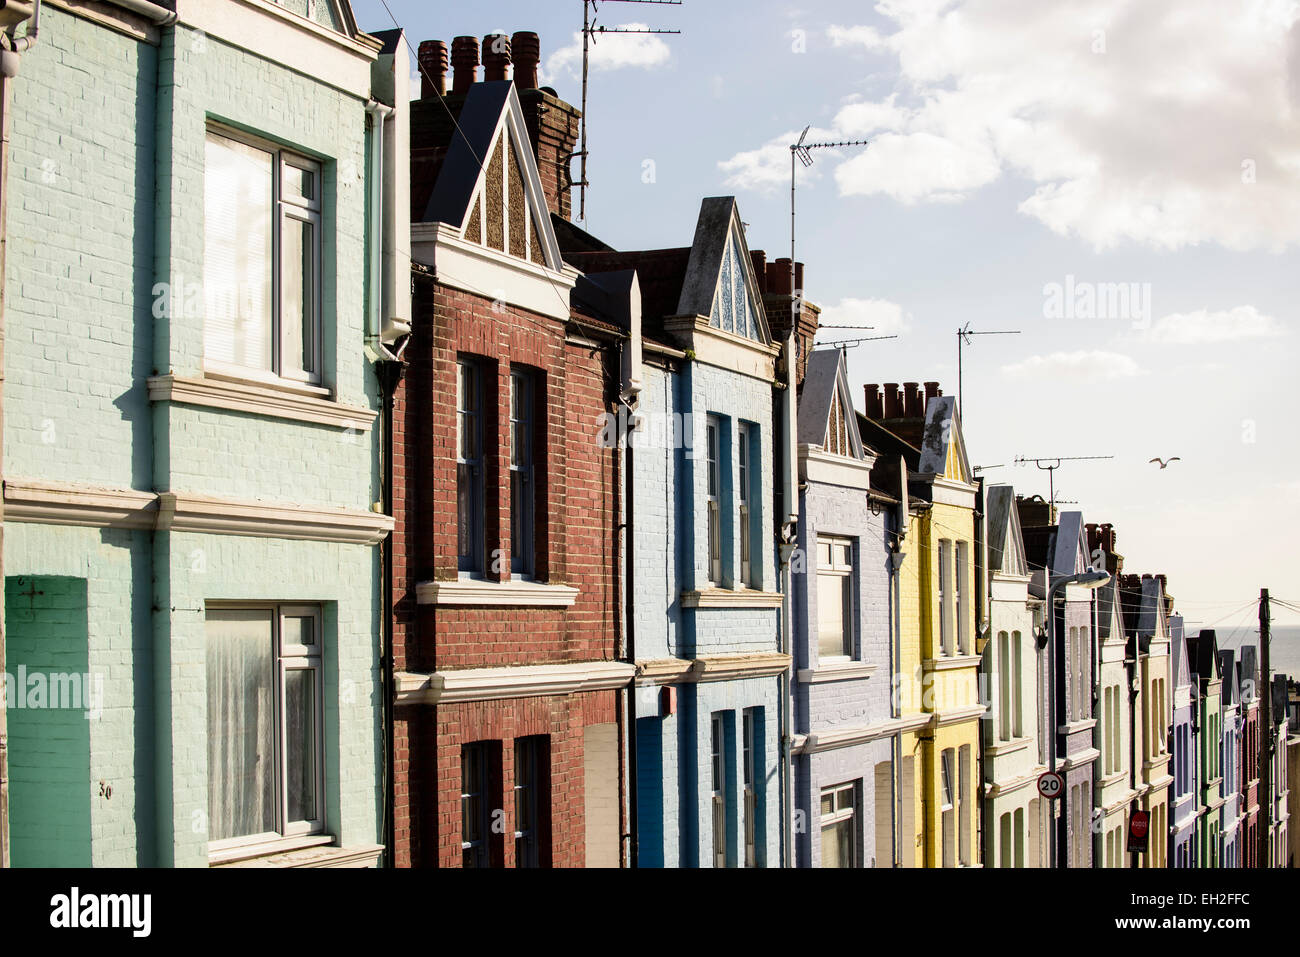 Row of colourful painted terraced houses in Brighton, East Sussex, England. Stock Photo